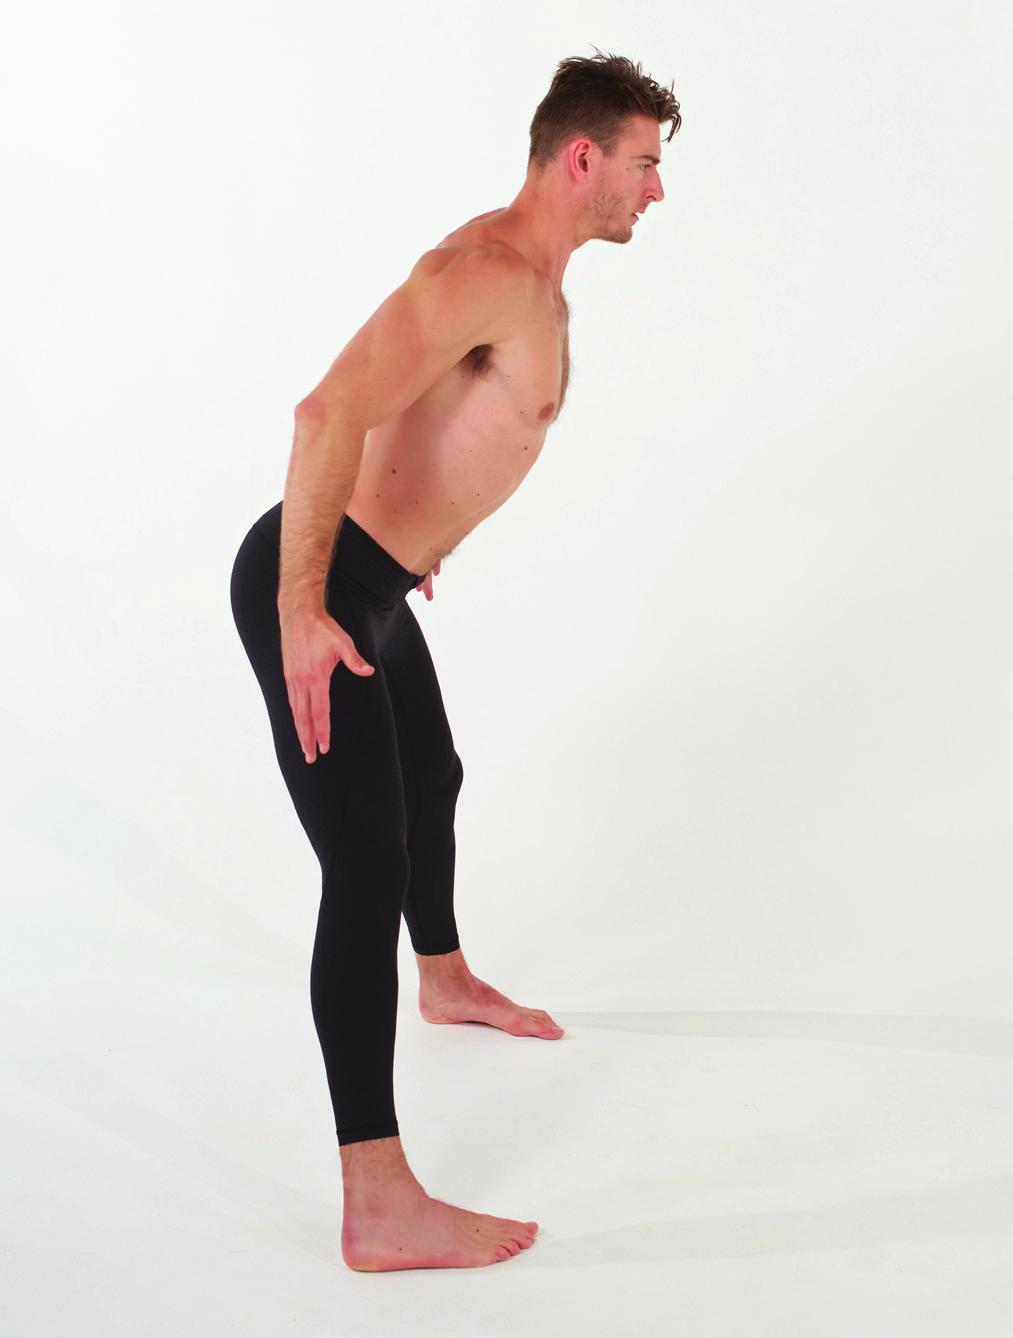 Anchor the lower body by grabbing the ground with your feet and pulling your weight back into your heels. 5 6 7 8 Pull your hips back behind your heels. Keep your Spine stable and your knees unlocked.